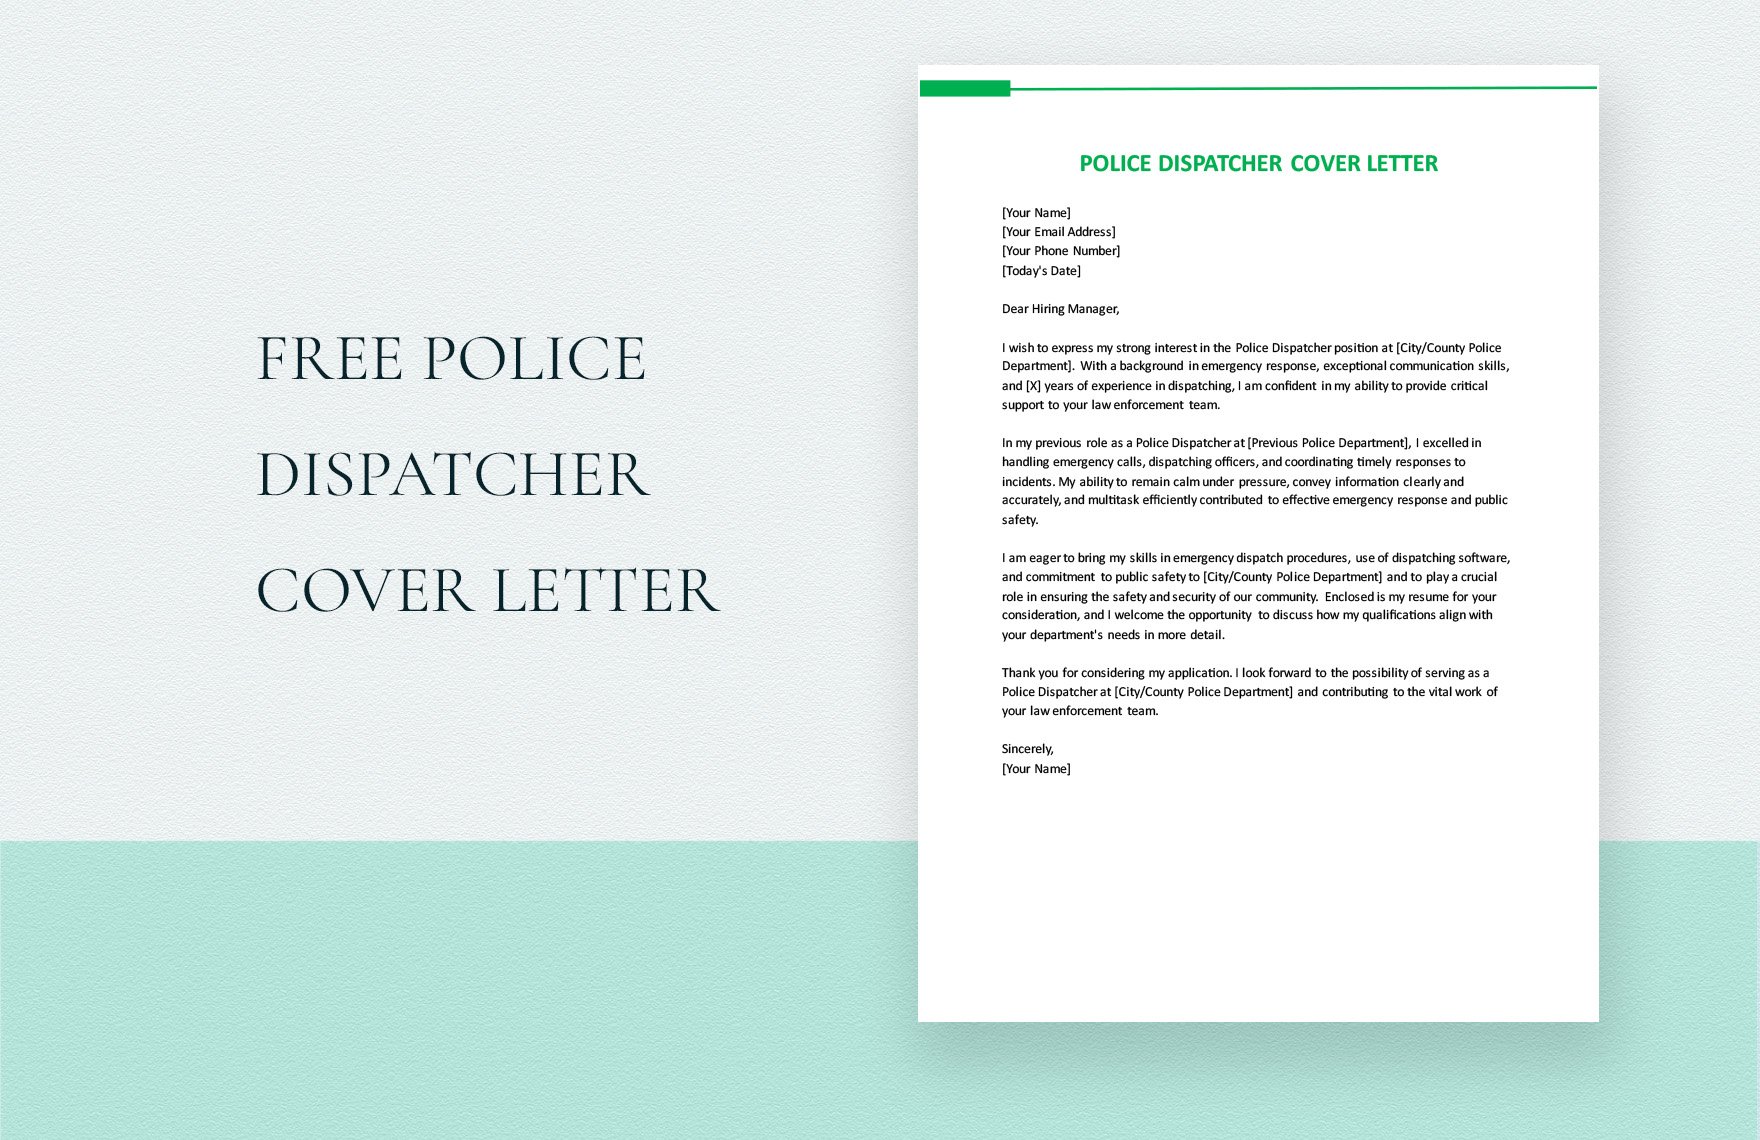 Police Dispatcher Cover Letter in Word, Google Docs, PDF